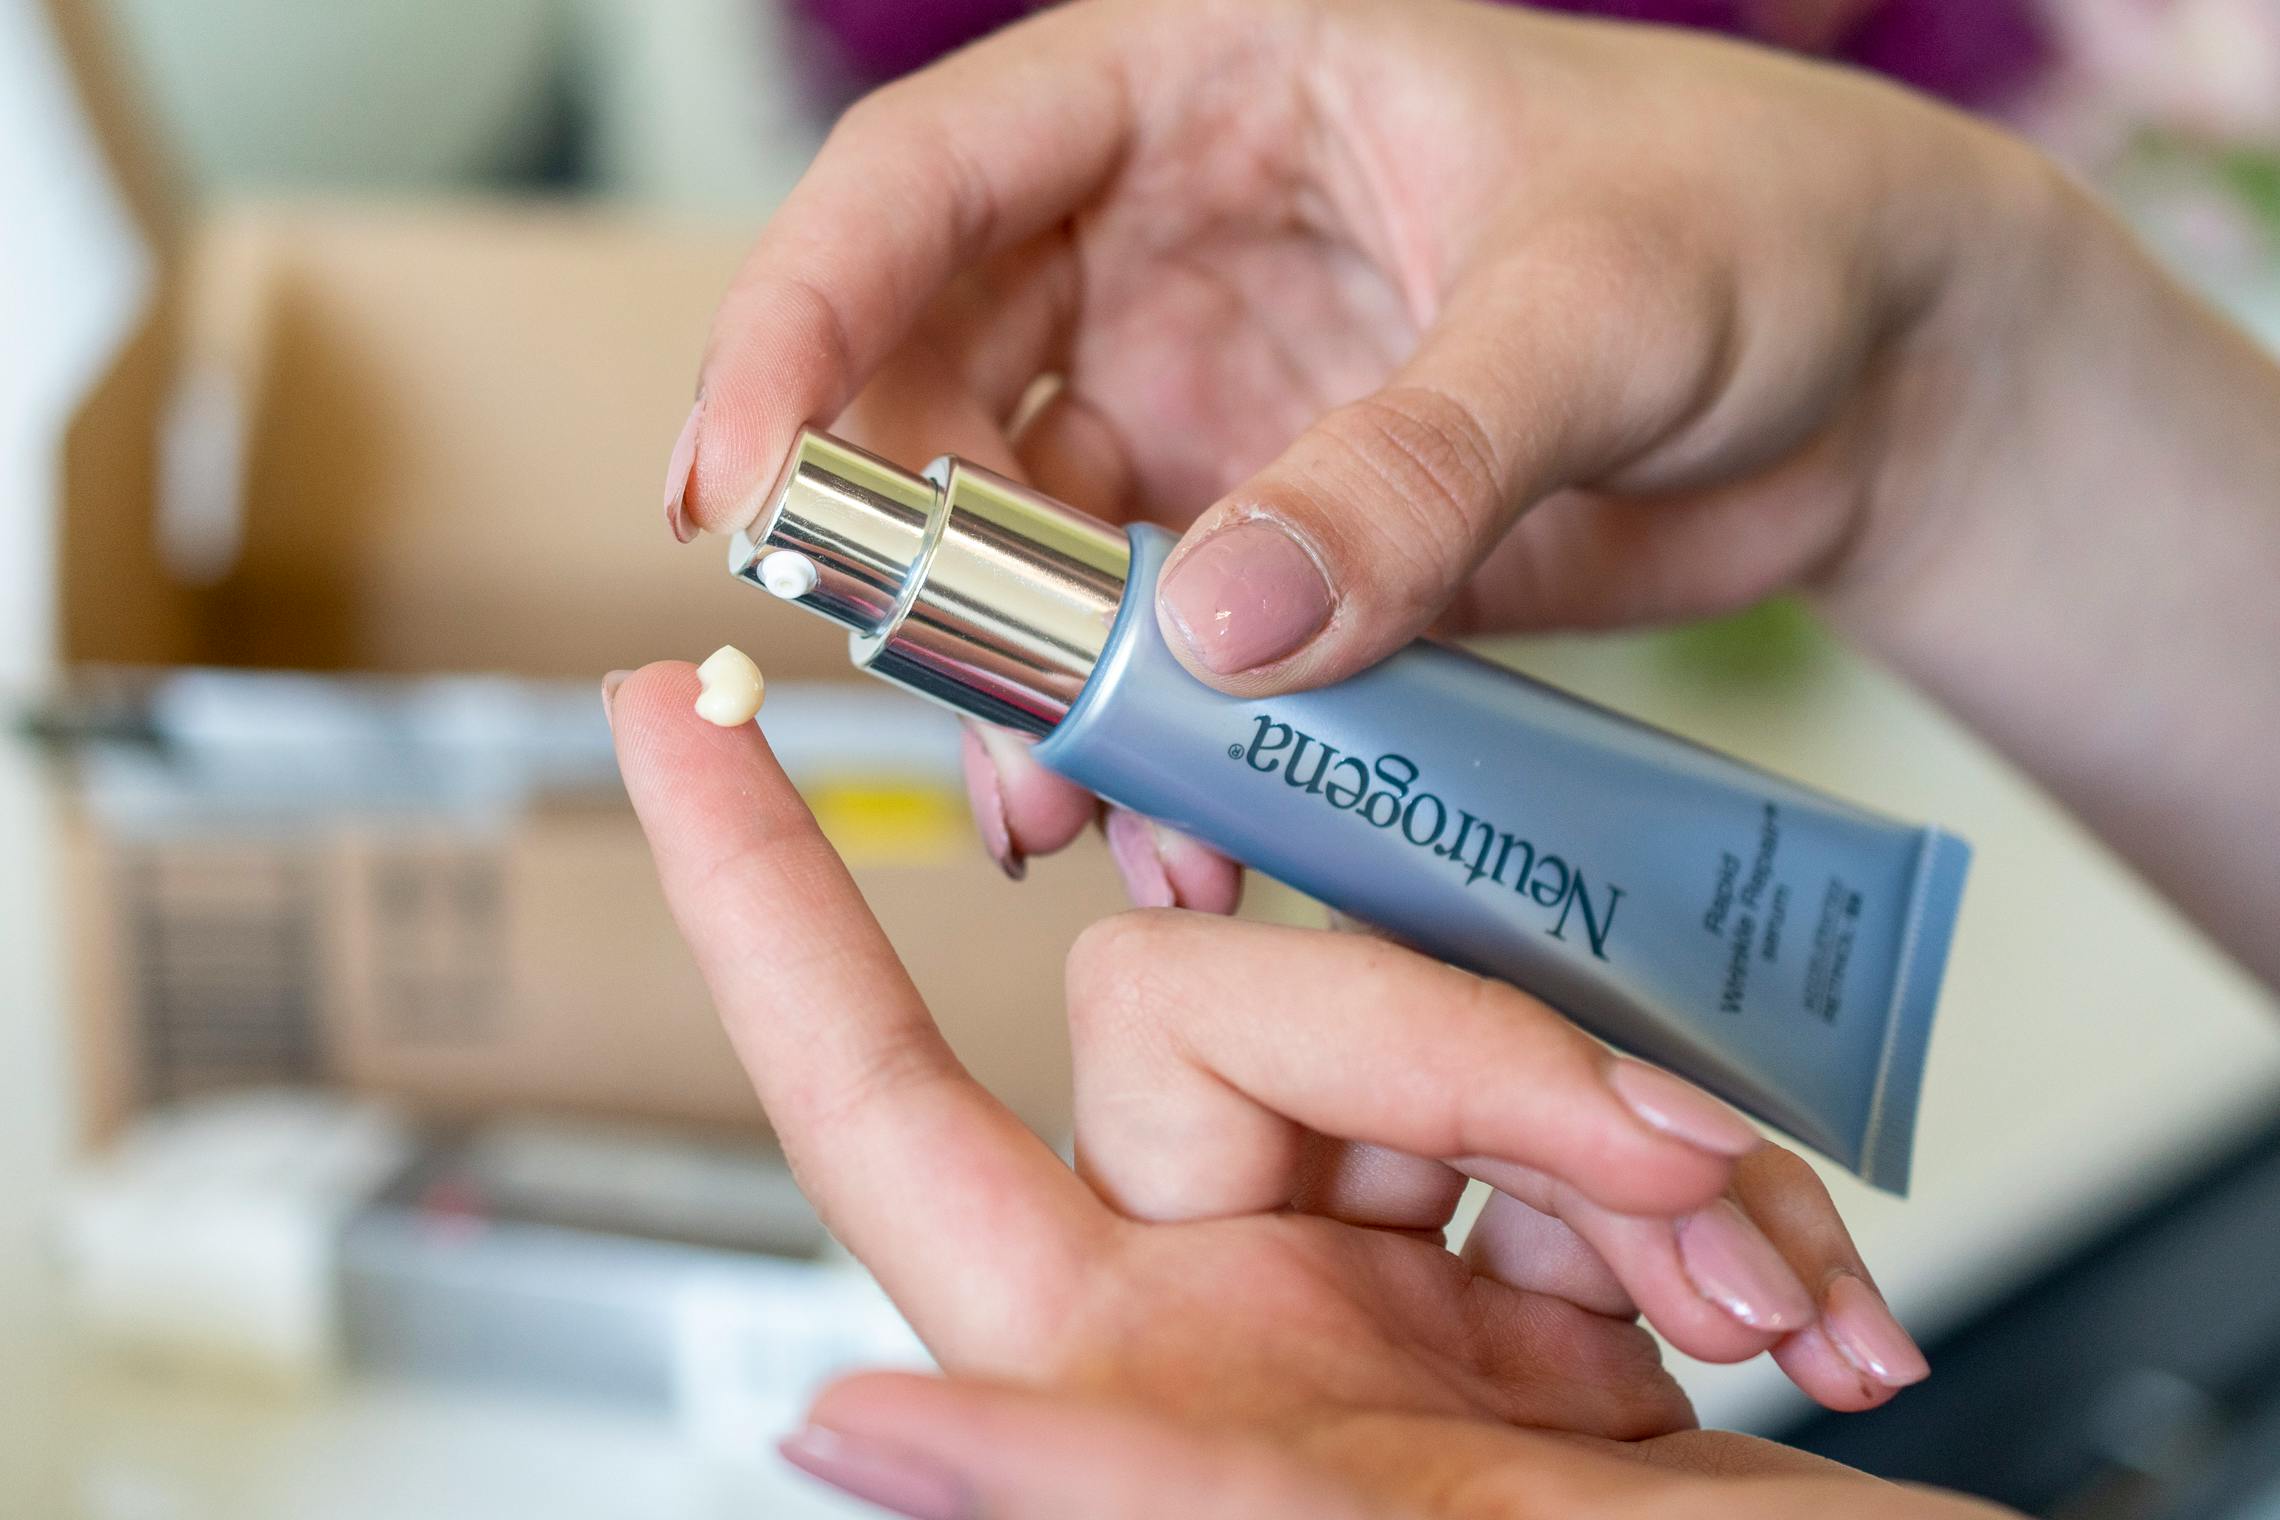 A woman putting a neutrogena product on her finger. 